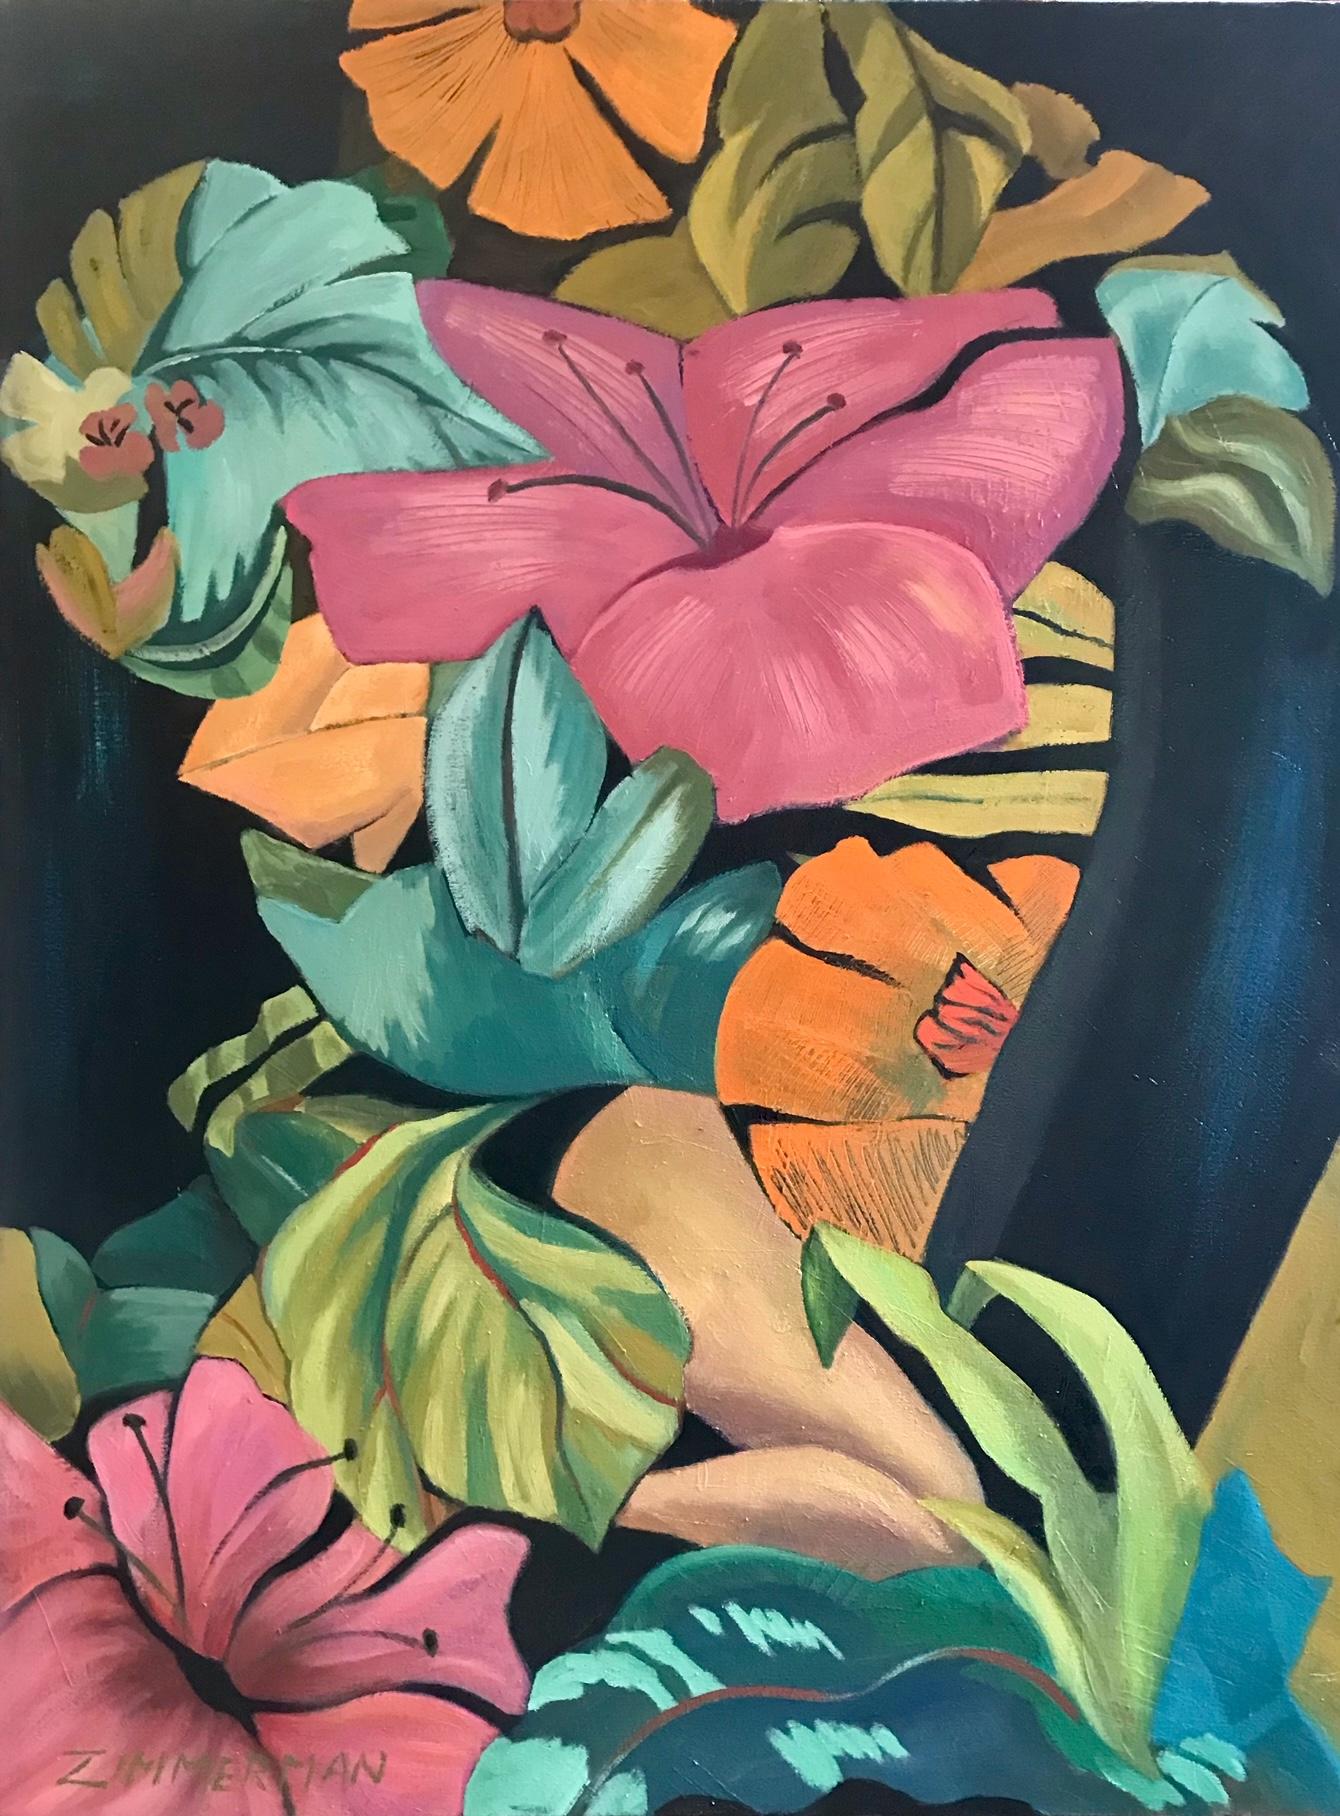 Tropical plants and flowers are assembled along with partially hidden figures in this tropical scene.

A Hawaiian Tapestry - Oil Paint By Marc Zimmerman

This masterpiece is exhibited in the Zimmerman Gallery, Carmel CA.


Marc Zimmerman creates